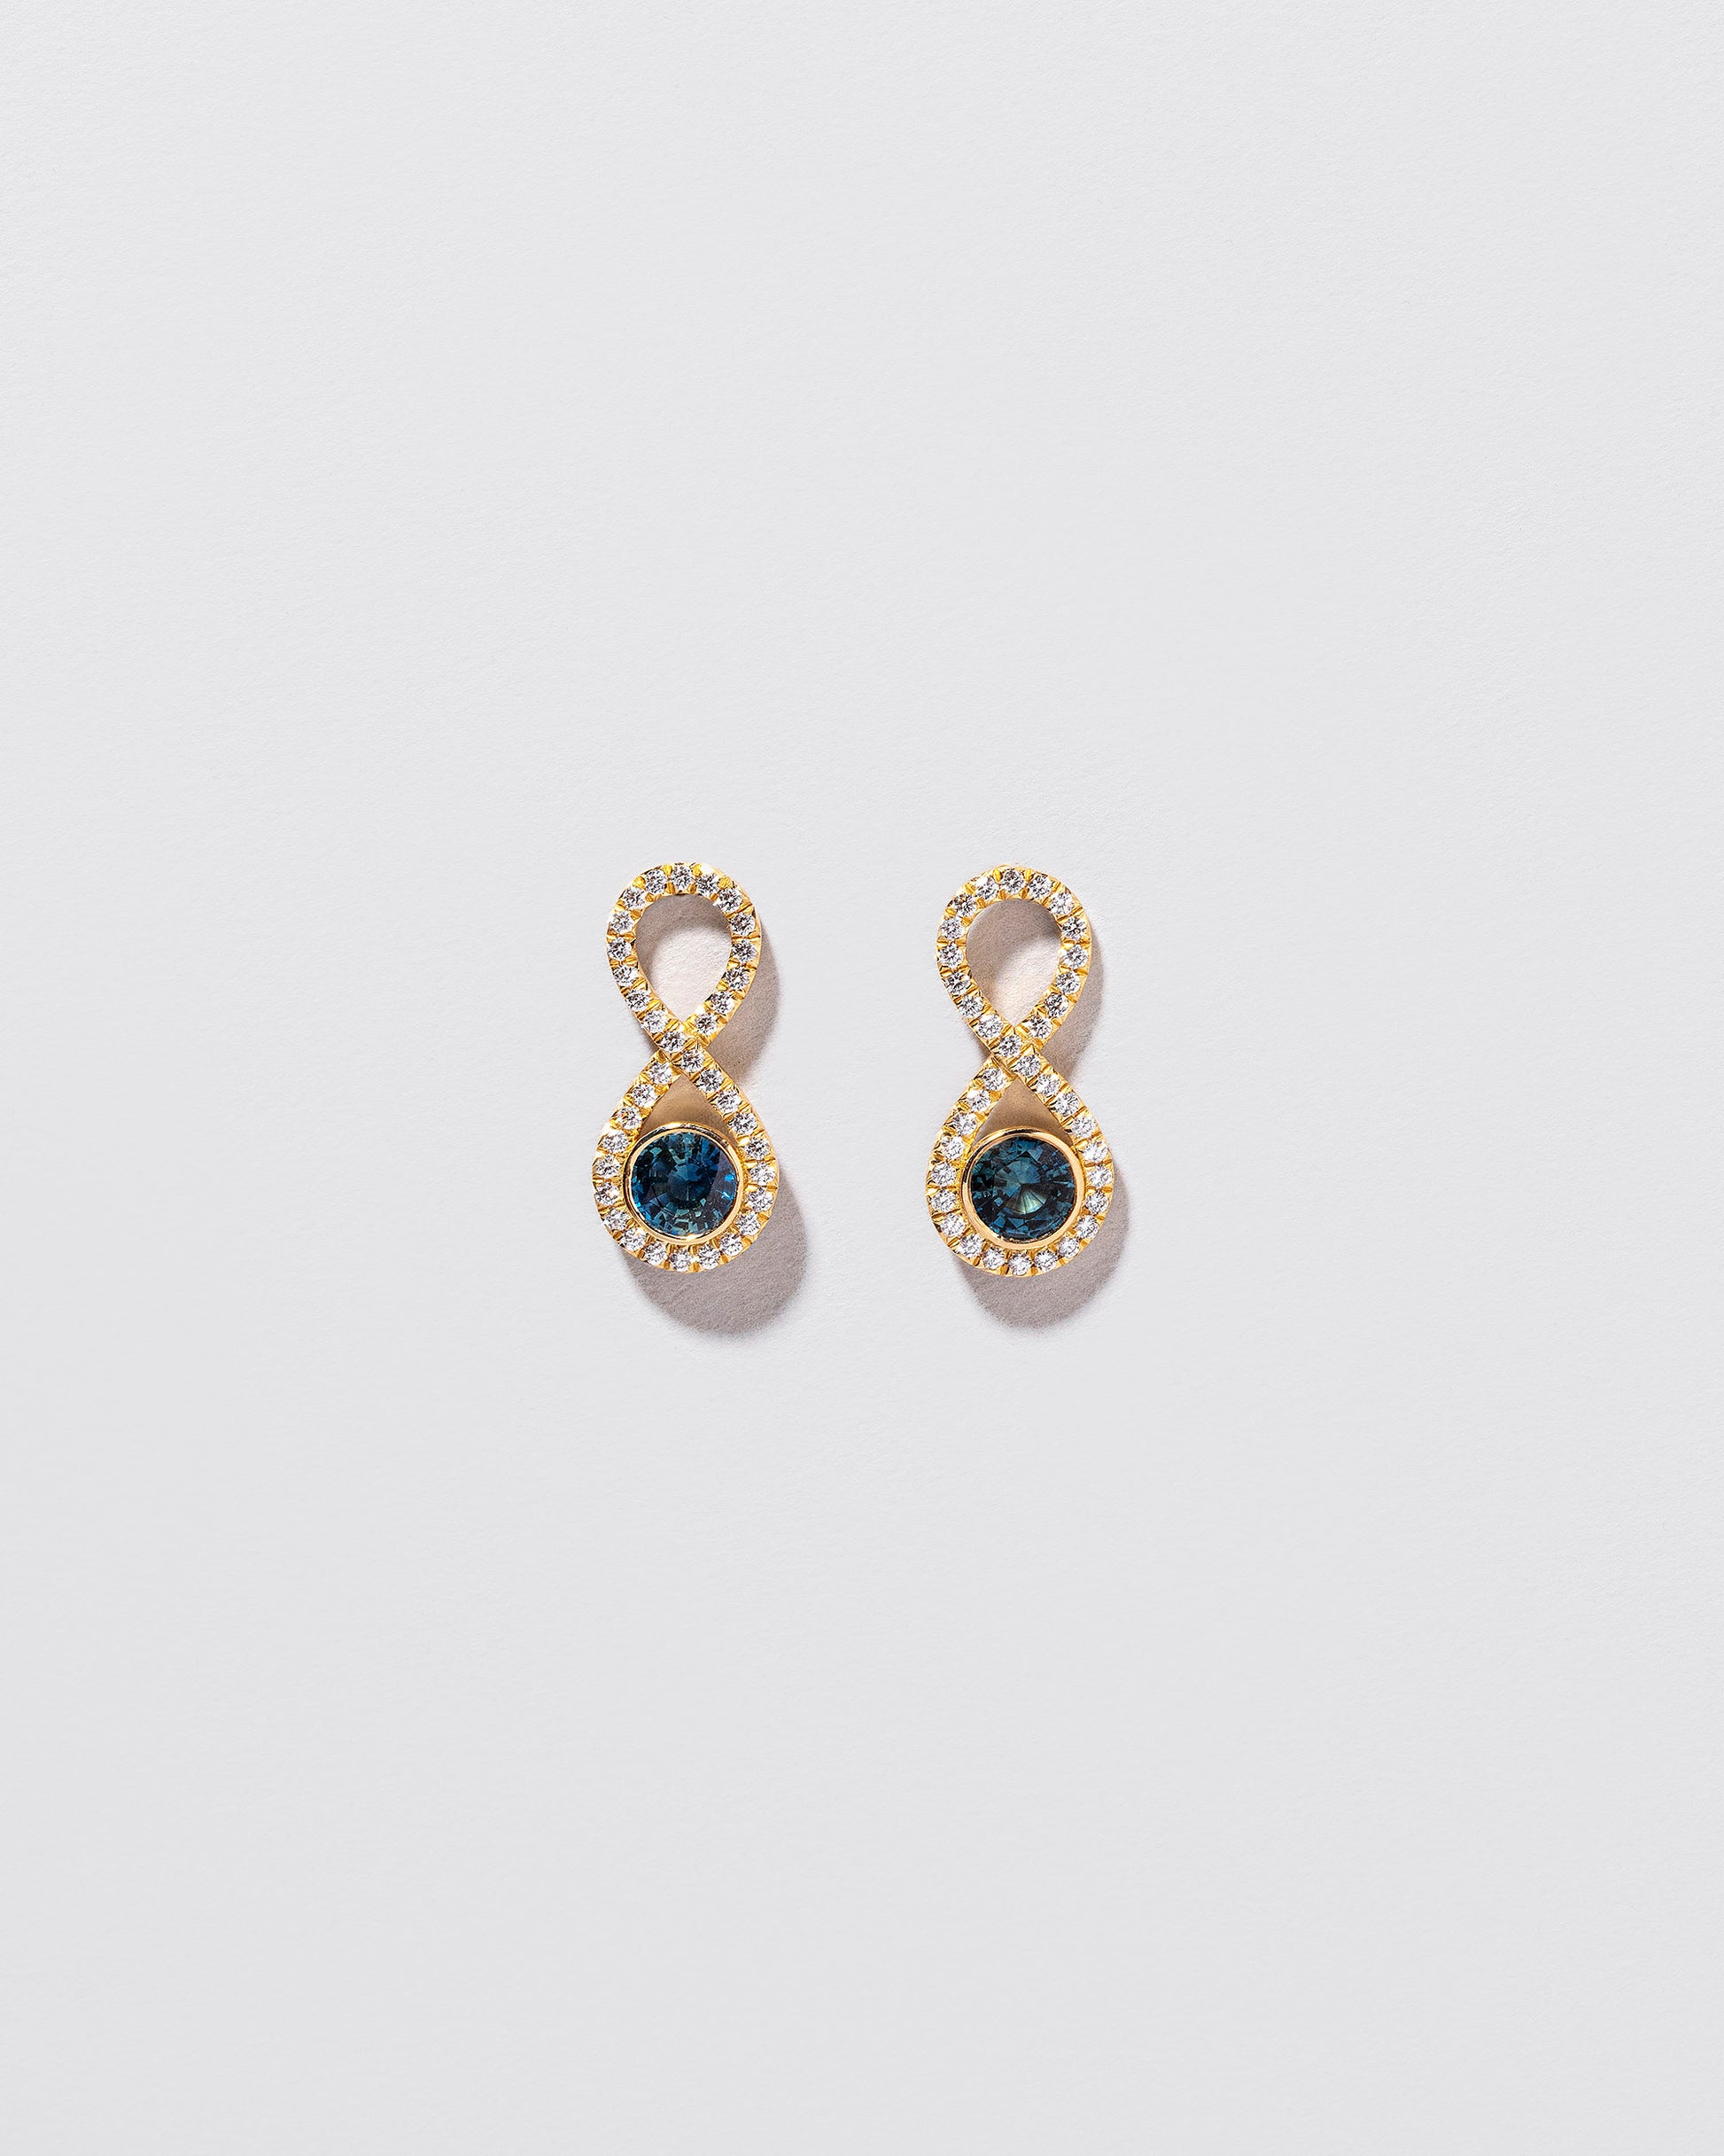  Ouroboros Earring on light color background.